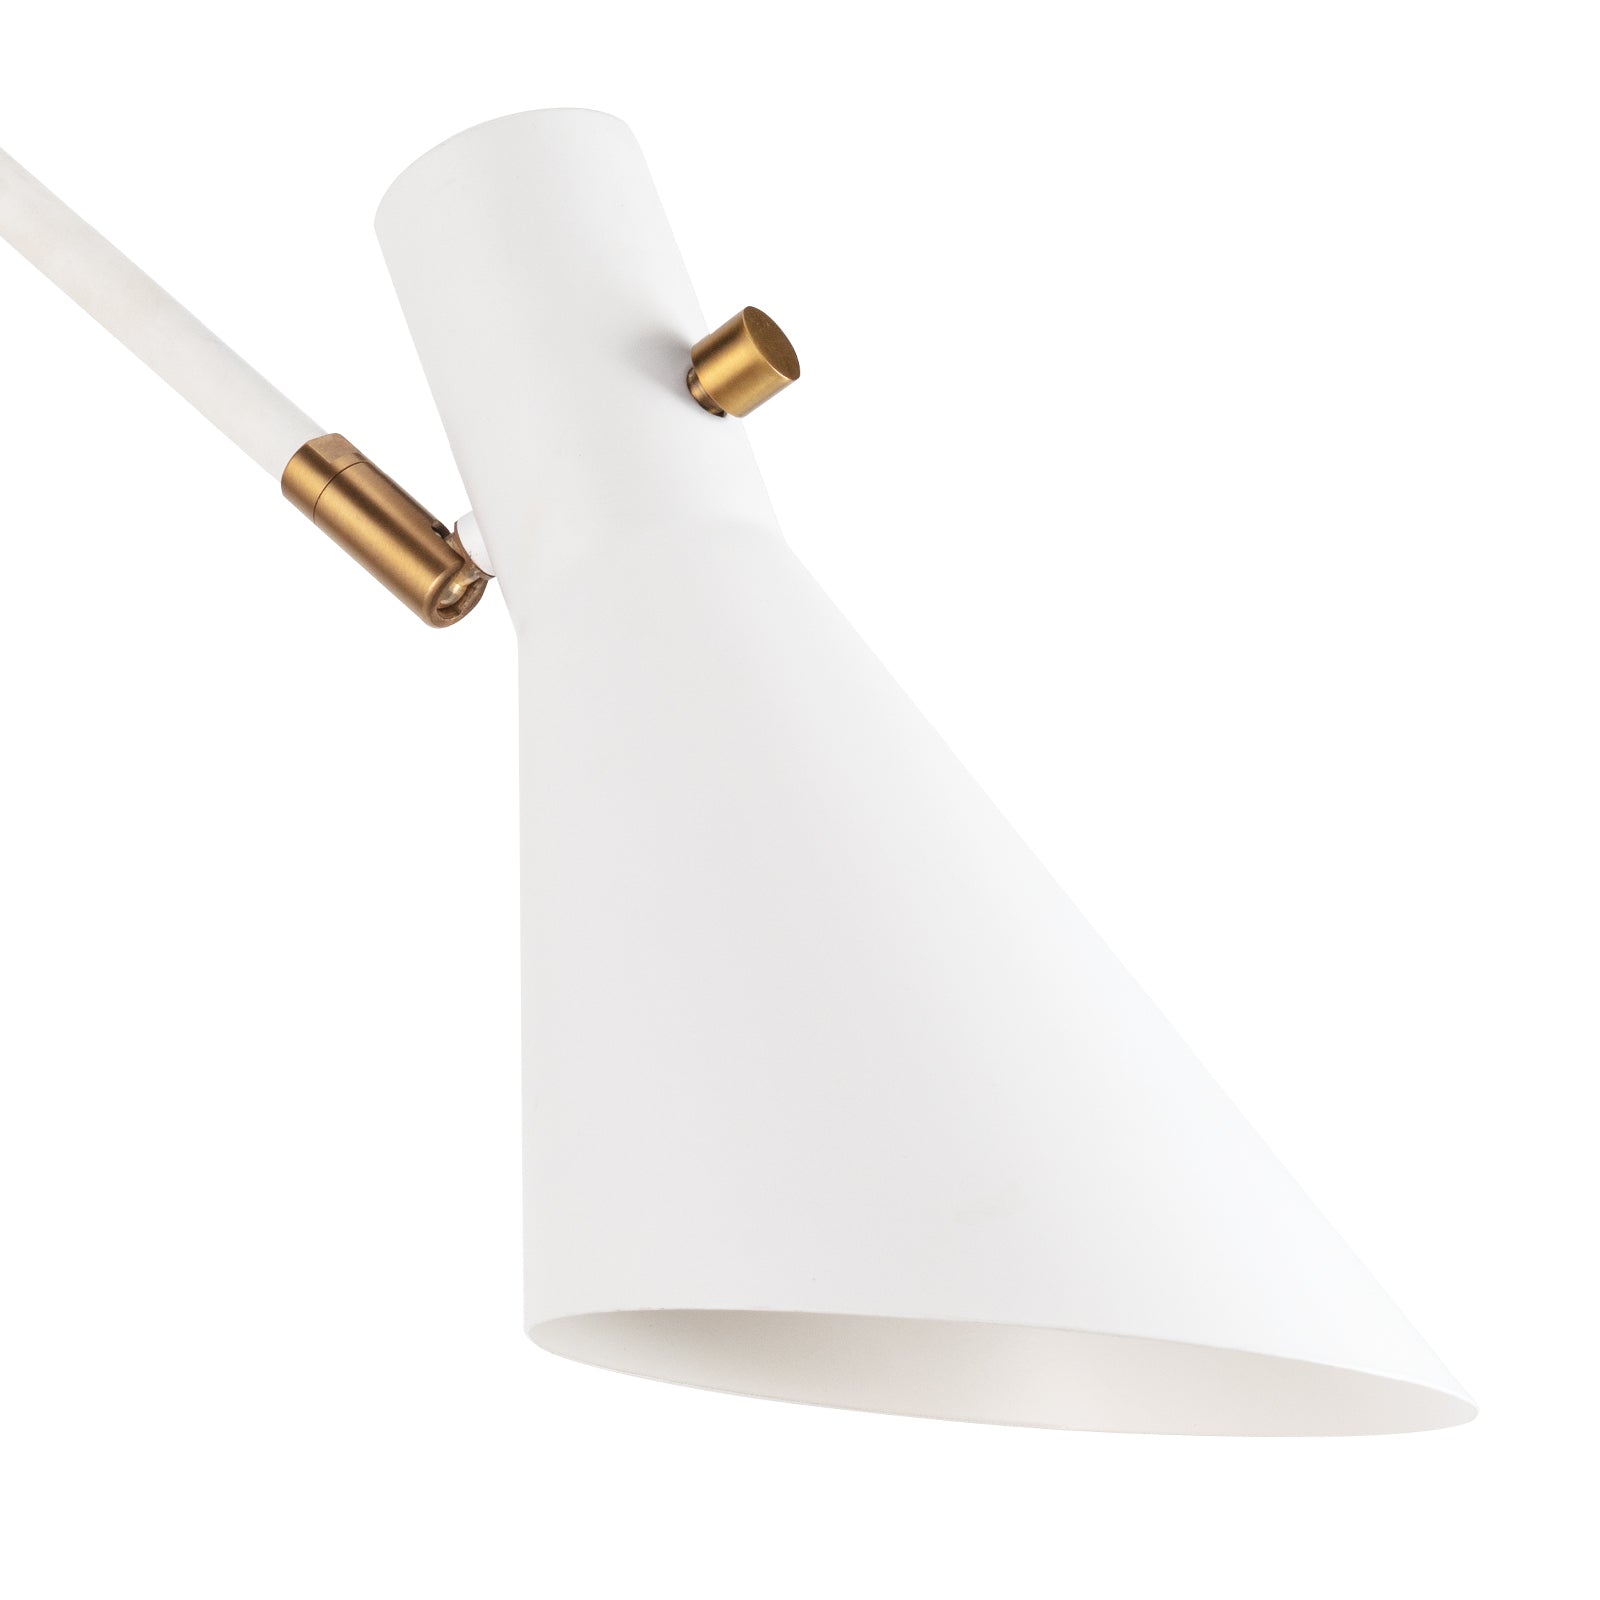 Regina Andrew Spyder Single Arm Sconce in White and Natural Brass